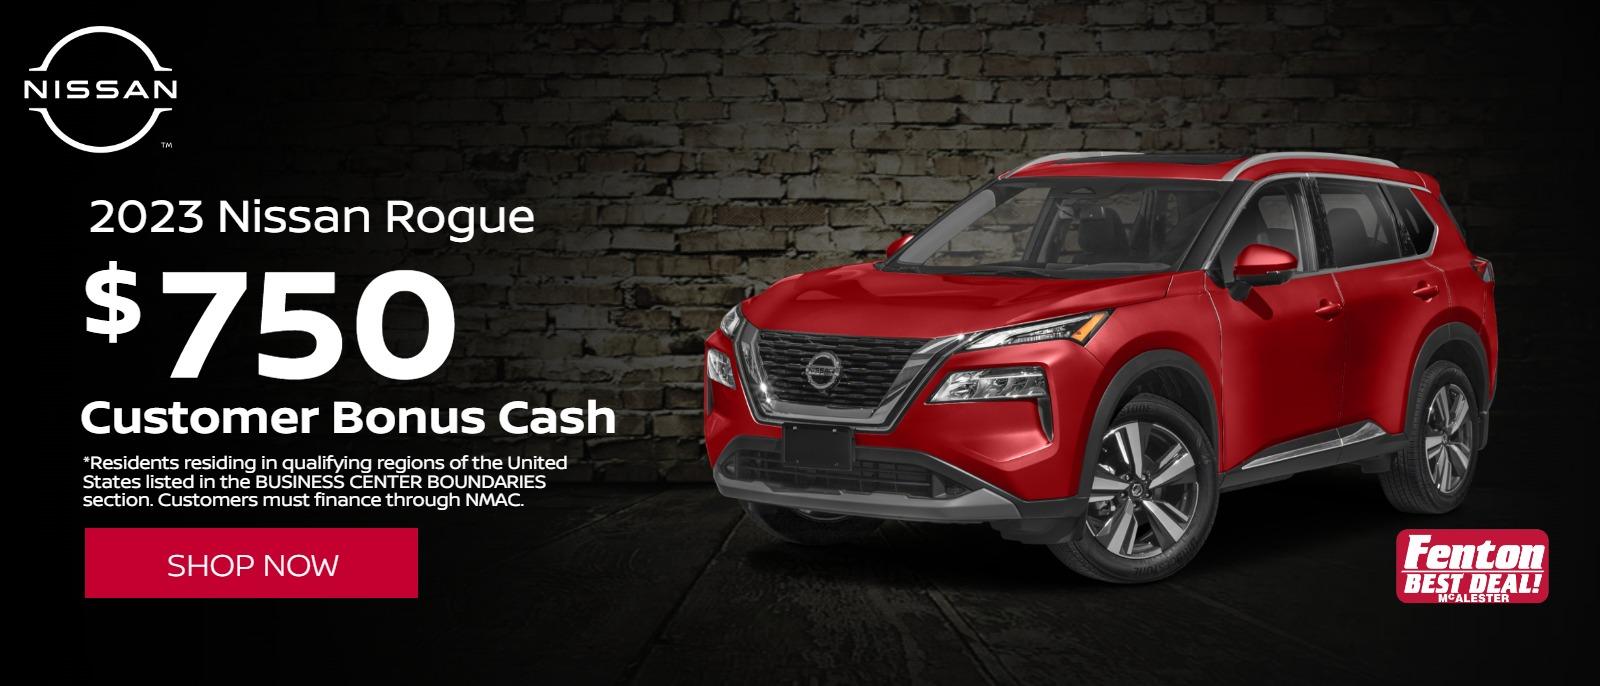 2023 Nissan Rogue
$750 Customer Bonus Cash
*Residents residing in qualifying regions of the United States listed in the BUSINESS CENTER BOUNDARIES section. Customers must finance through NMAC.